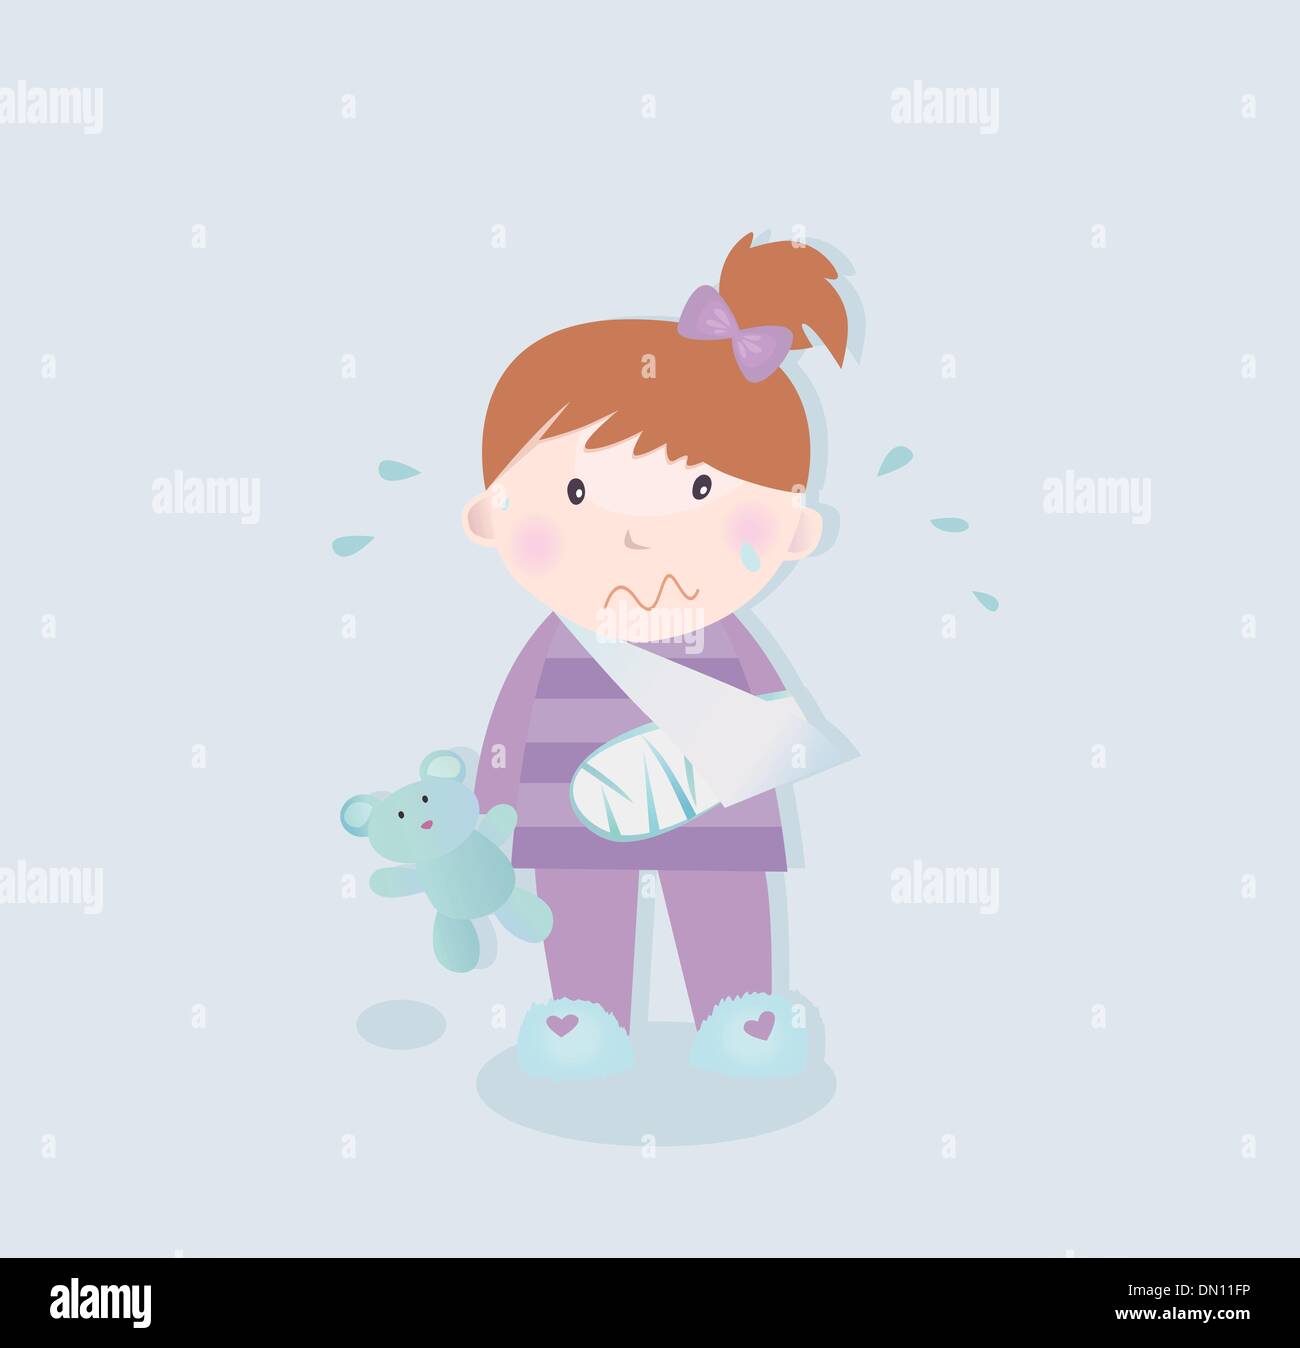 Small patient - child with fractured bone Stock Vector